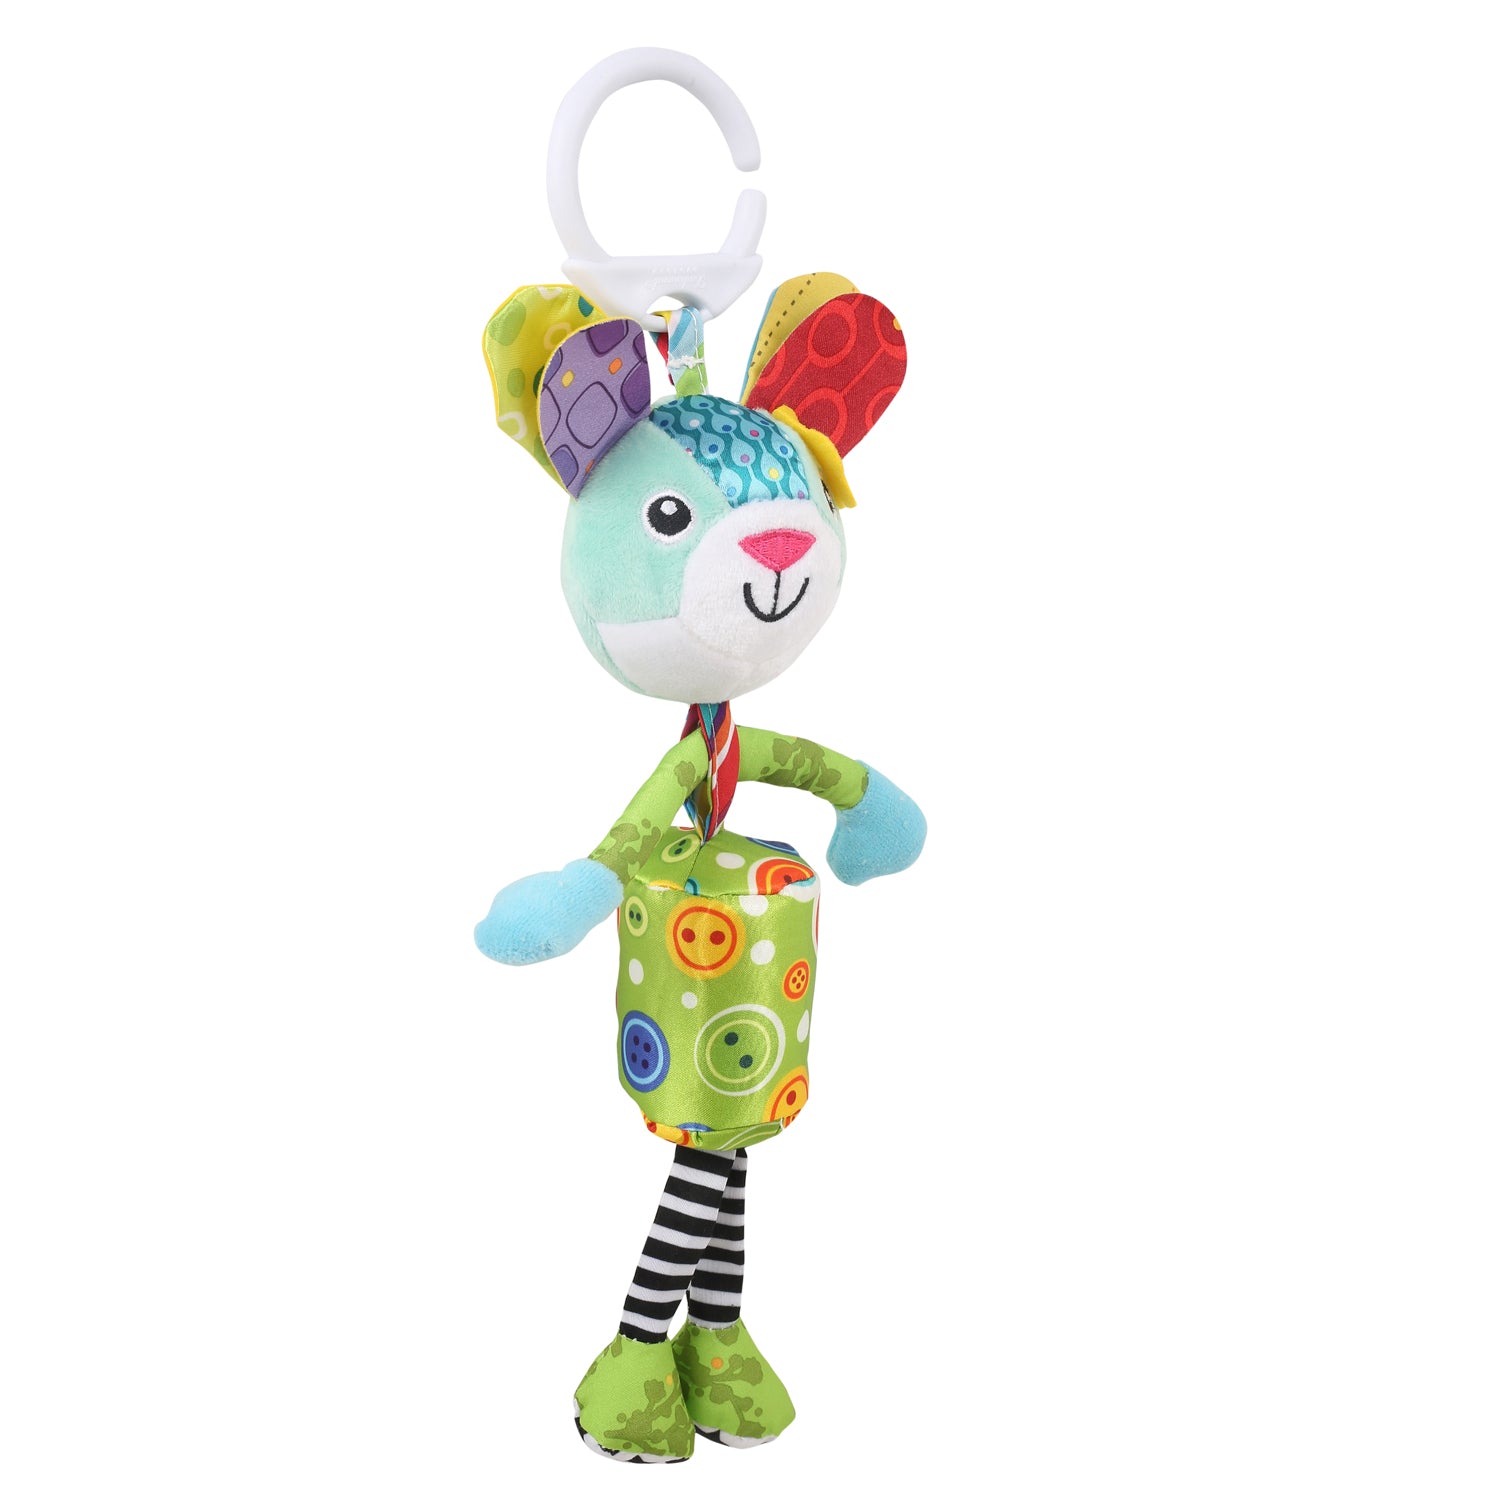 Mr. Flourist Green Hanging Musical Toy / Wind Chime Soft Rattle